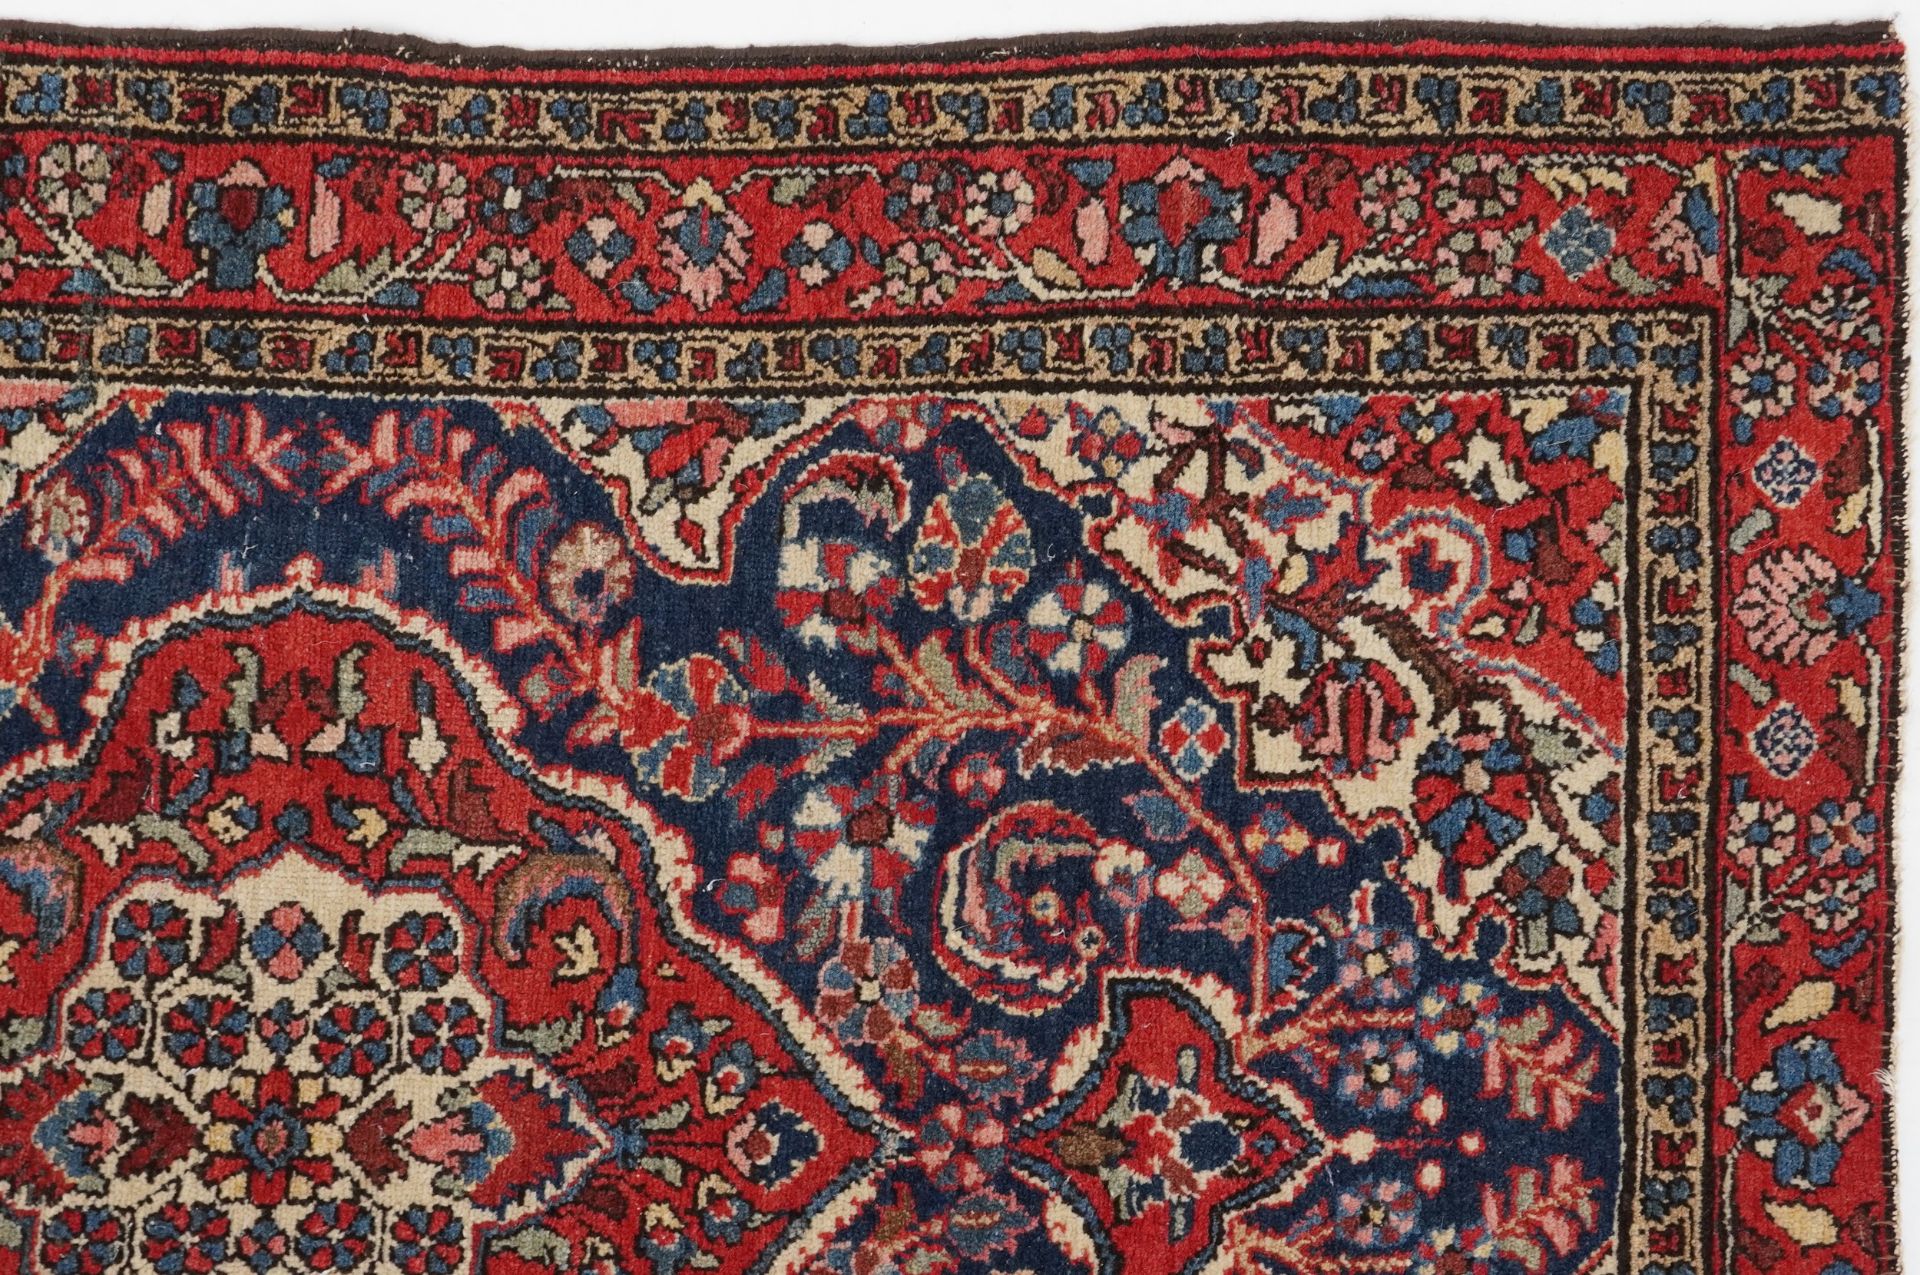 Rectangular Persian blue and red ground rug having and allover floral design, 146cm x 103cm : For - Image 3 of 5